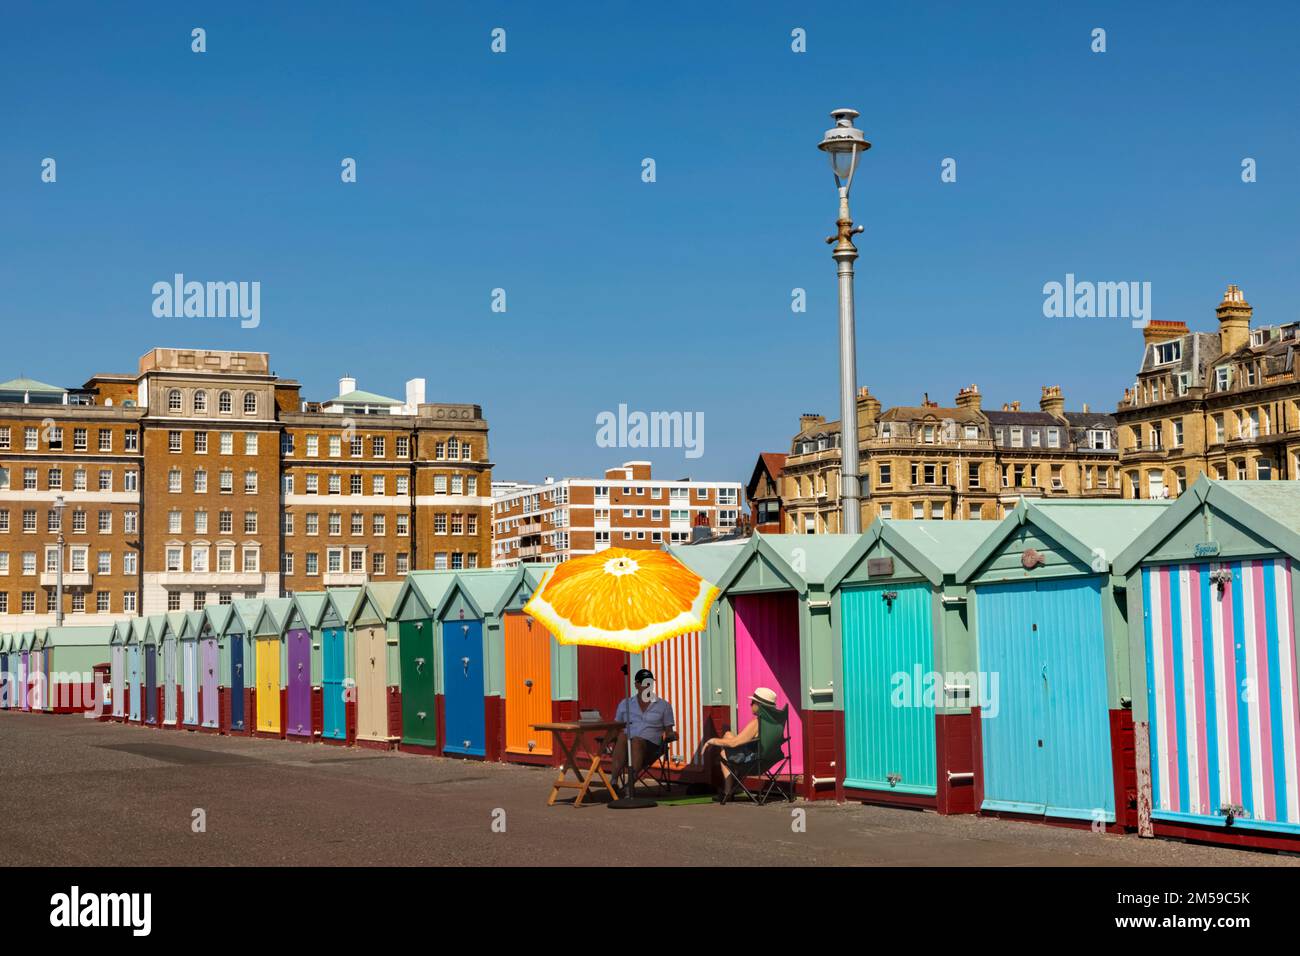 Angleterre, East Sussex, Brighton, Hove, Row of Colorful Beach huts *** Légende locale *** Royaume-Uni,Grande-Bretagne,Angleterre,Angleterre,Anglais,Briti Banque D'Images